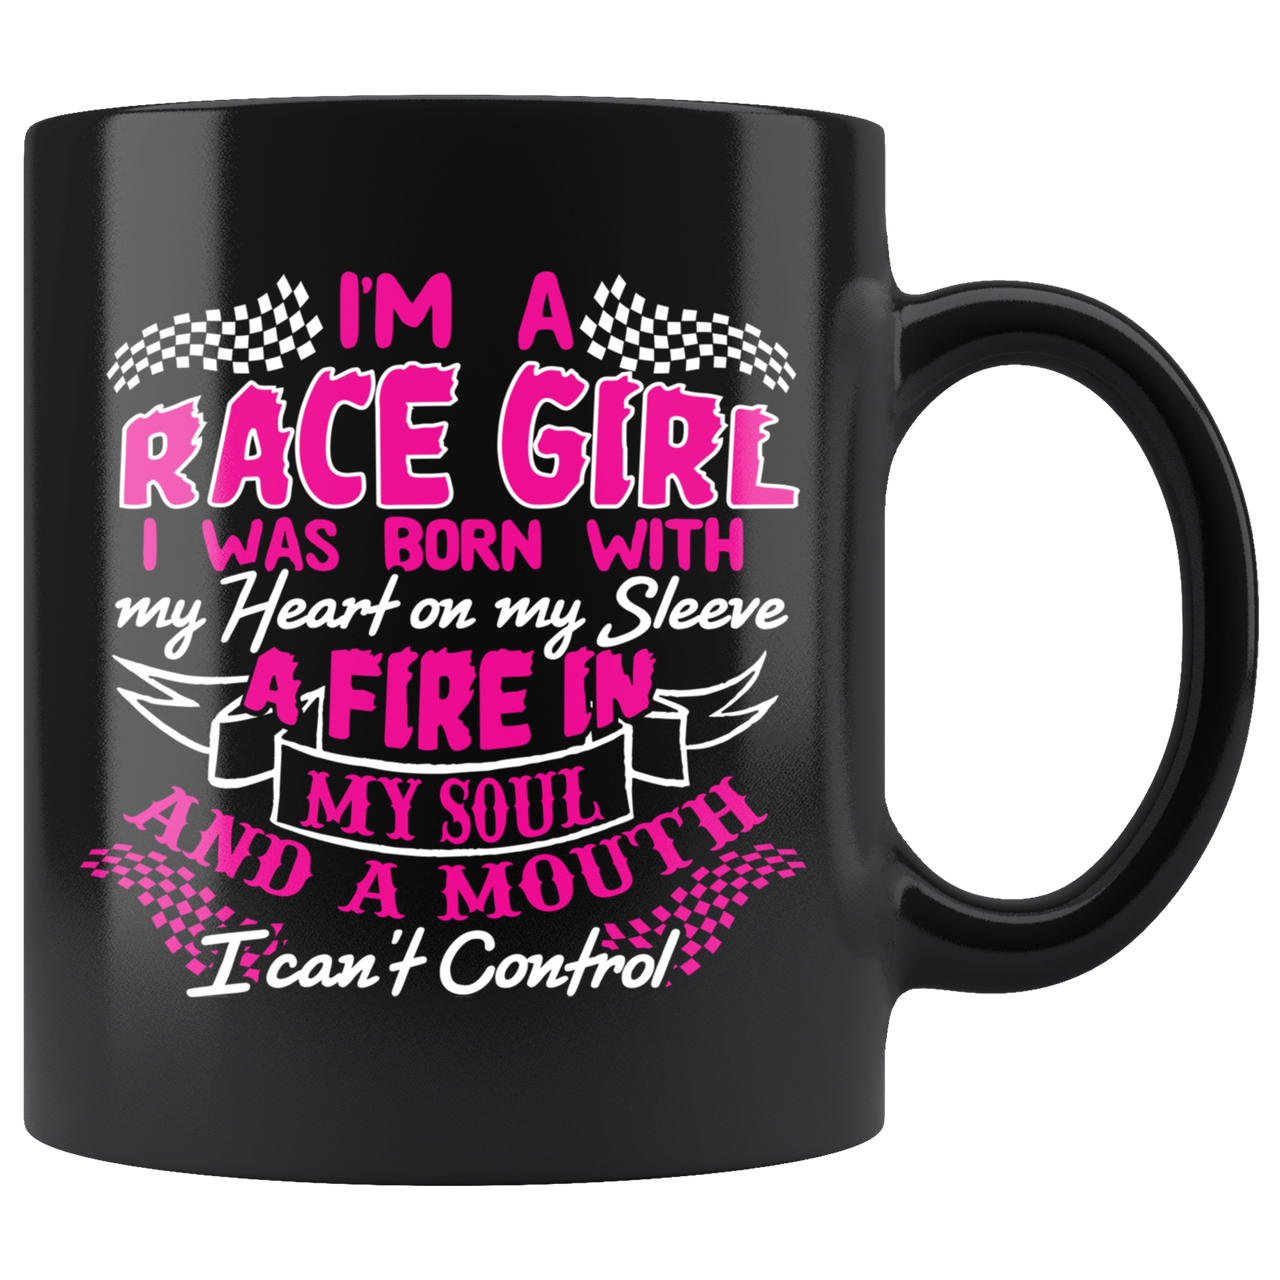 I'm A Race Girl I Was Born With My Heart On My Sleeve A Fire In My Soul And A Mouth I Can't Control Mug!